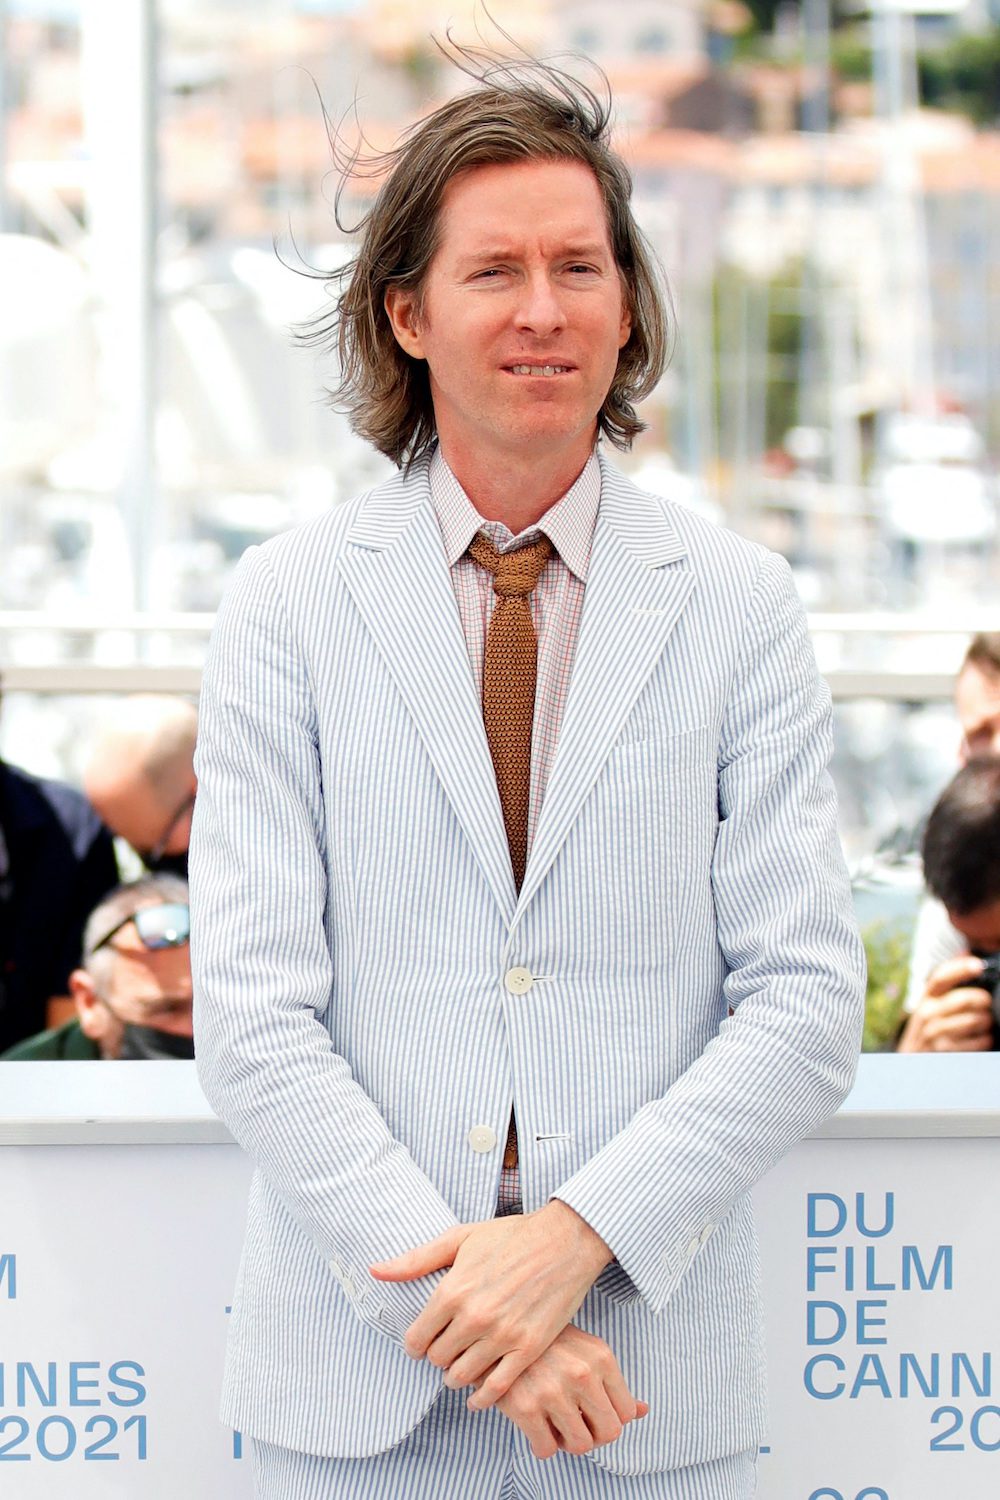 FILE PHOTO: The 74th Cannes Film Festival - Photocall for the film "The French Dispatch" in competition  - Cannes, France, July 13, 2021. Director Wes Anderson poses. REUTERS/Sarah Meyssonnier/File Photo